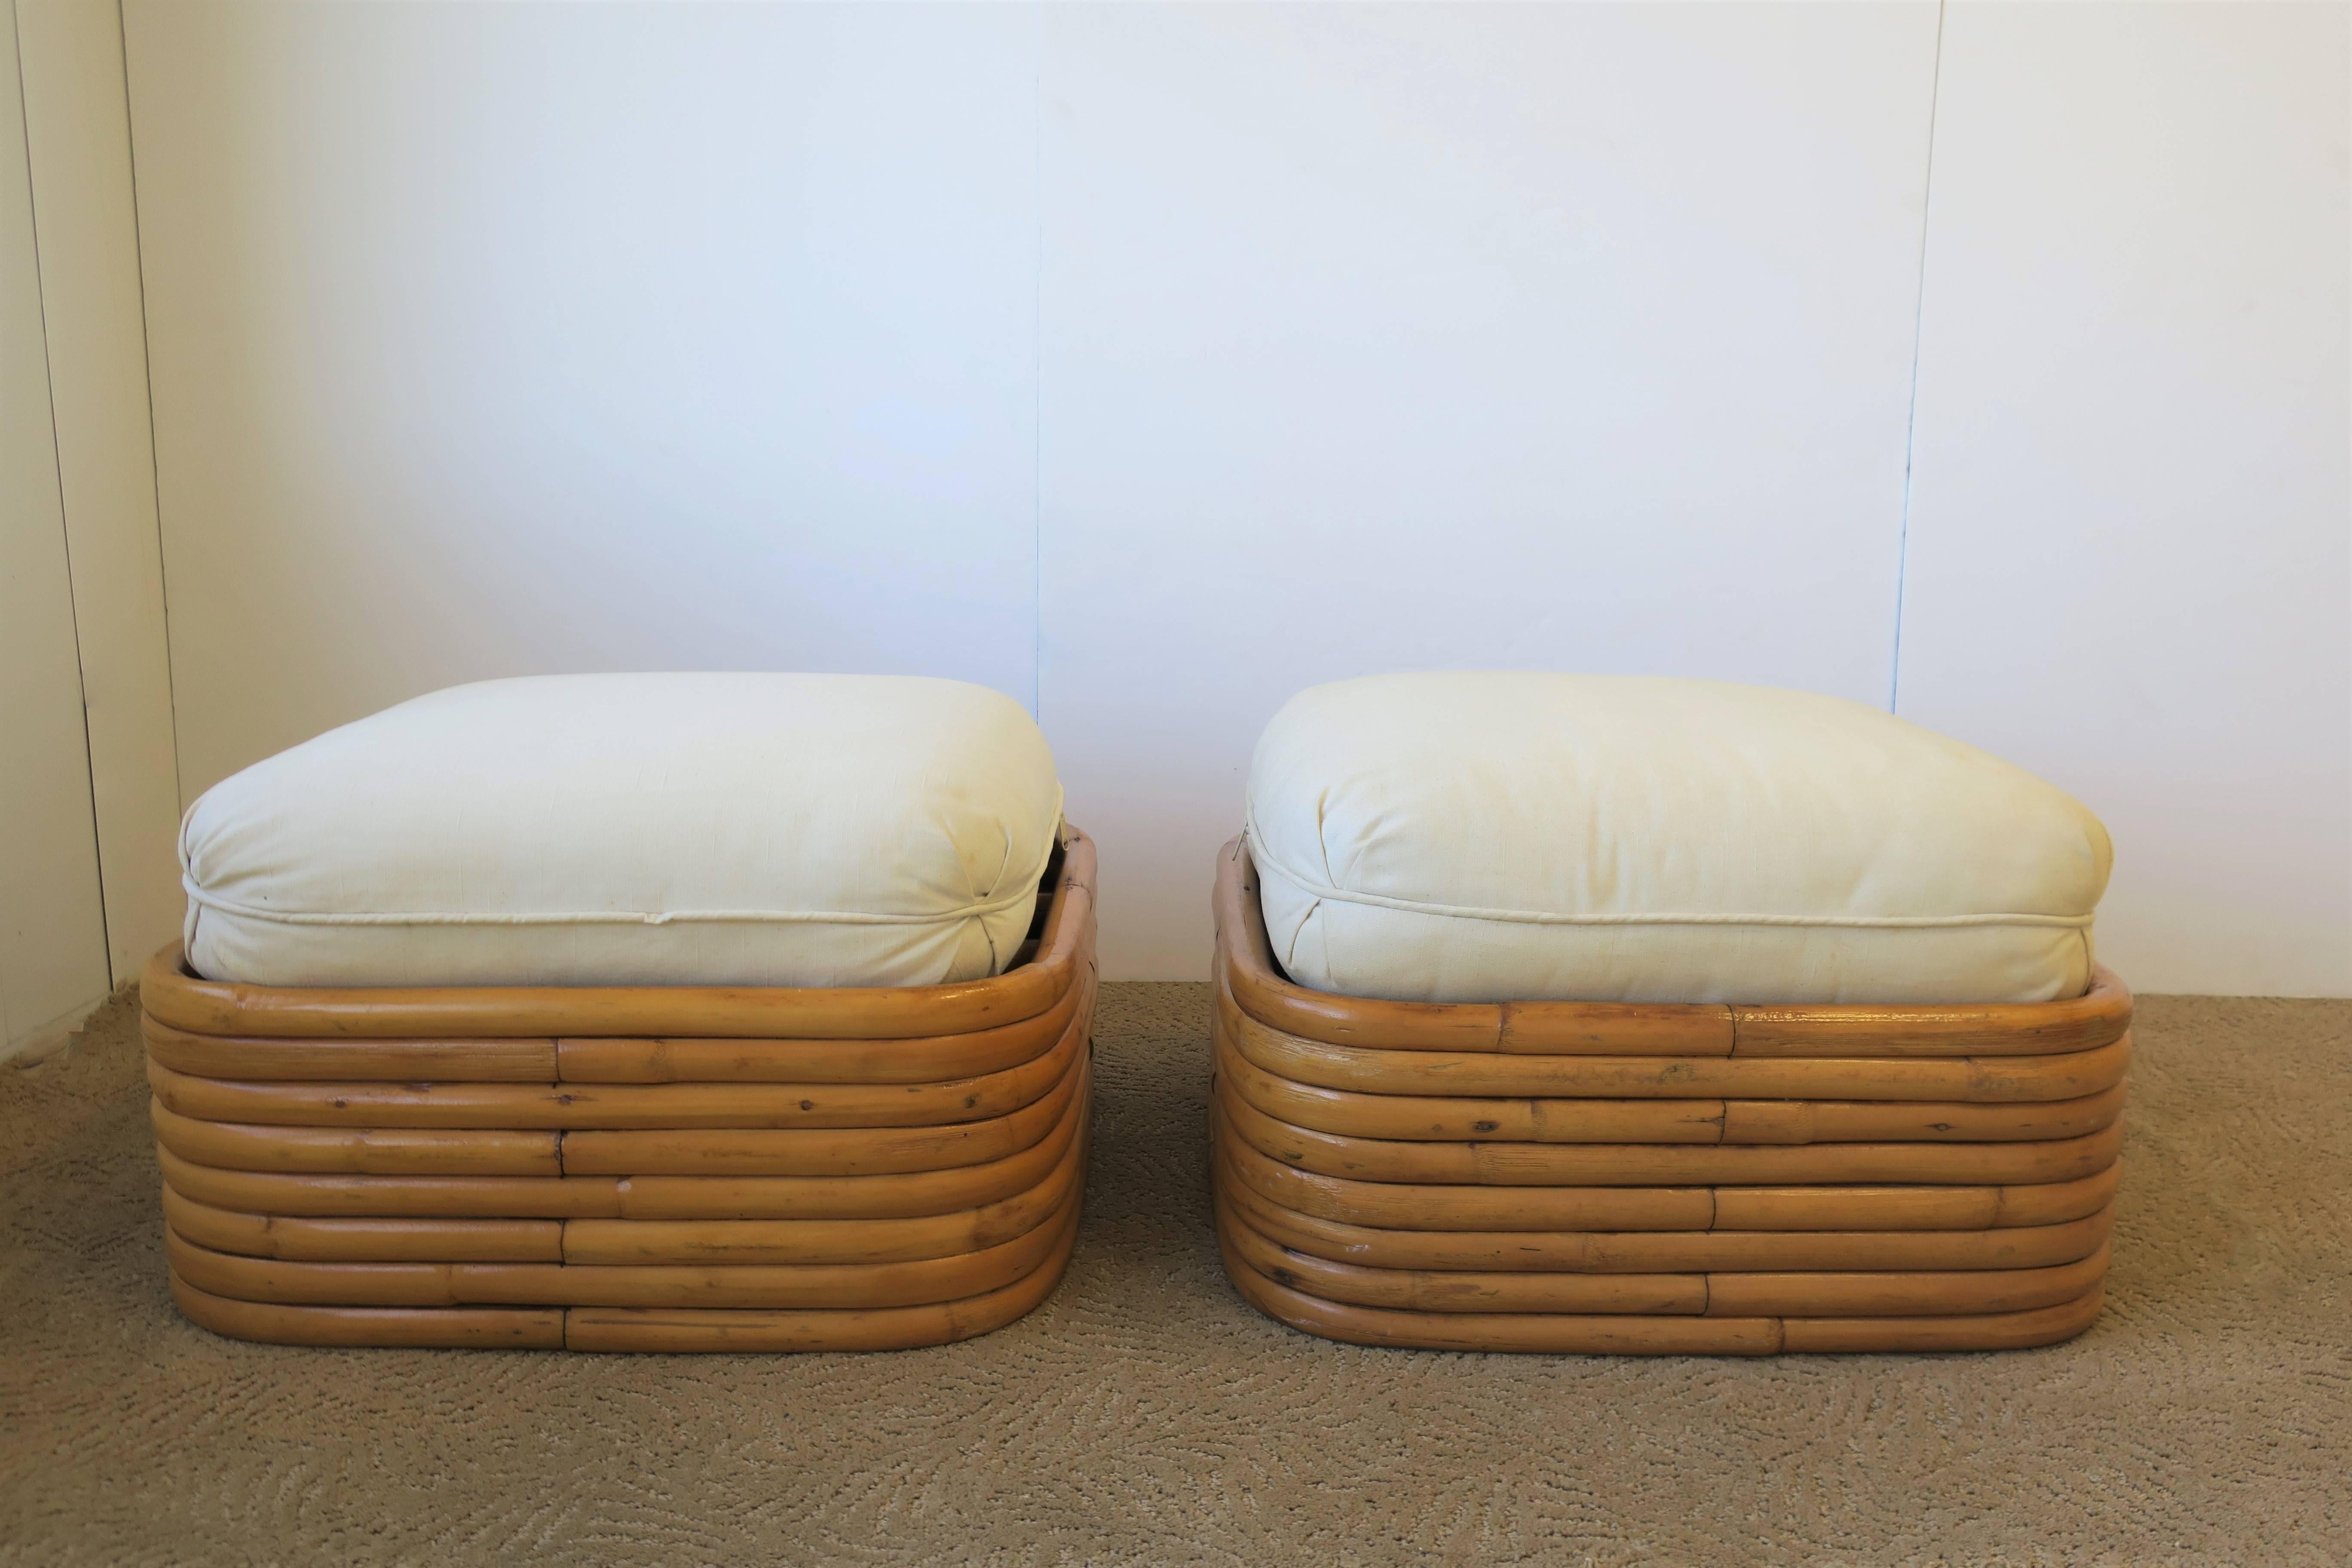 Vintage pair of Paul Frankl style stacked rattan benches or ottomans with upholstered seat cushions. Cushions are a sand or off-white hue. Each measures: 21.5 inches square x 8.5 inches high. 13 inches high with seat cushion. 

Pair available here